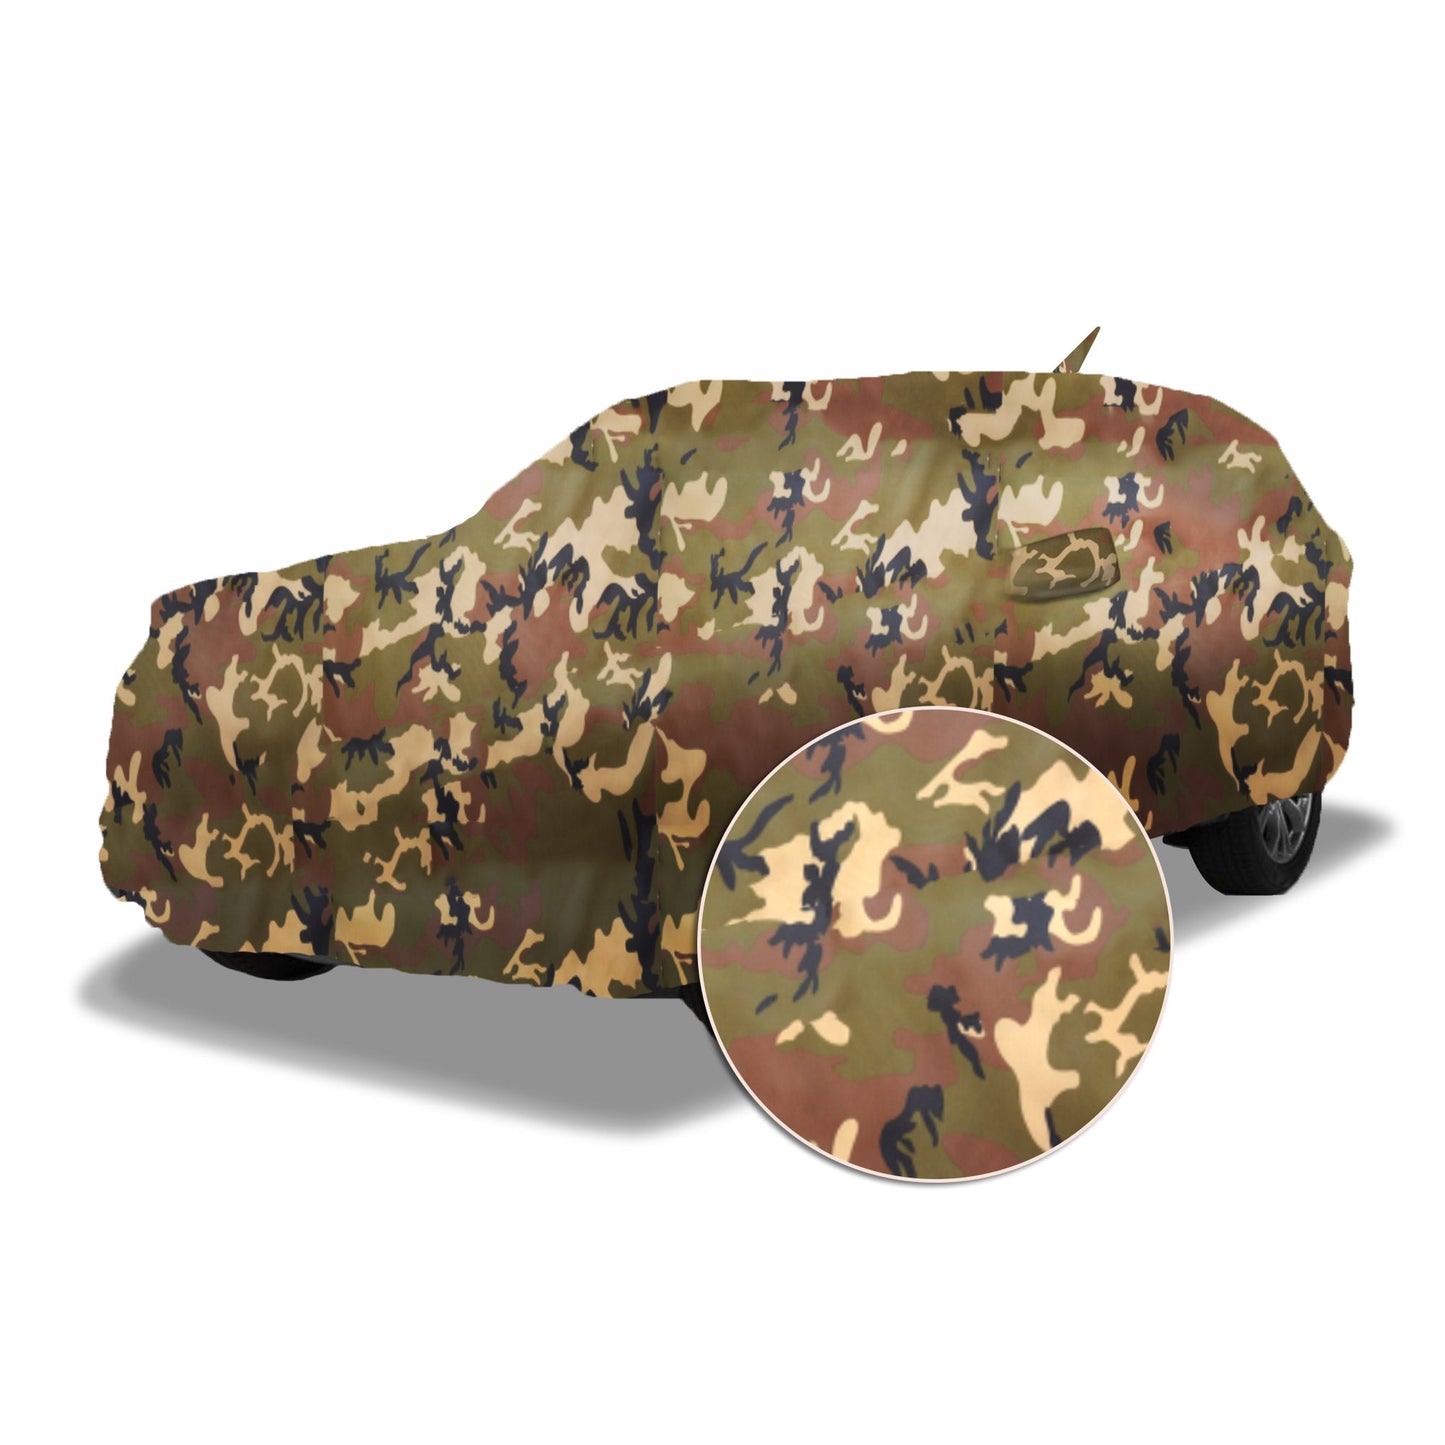 Ascot Hyundai Grand i10 Nios Car Body Cover 2019-2023 Model Extra Strong & Dust Proof Jungle Military Car Cover with UV & Water-Resistant Coating